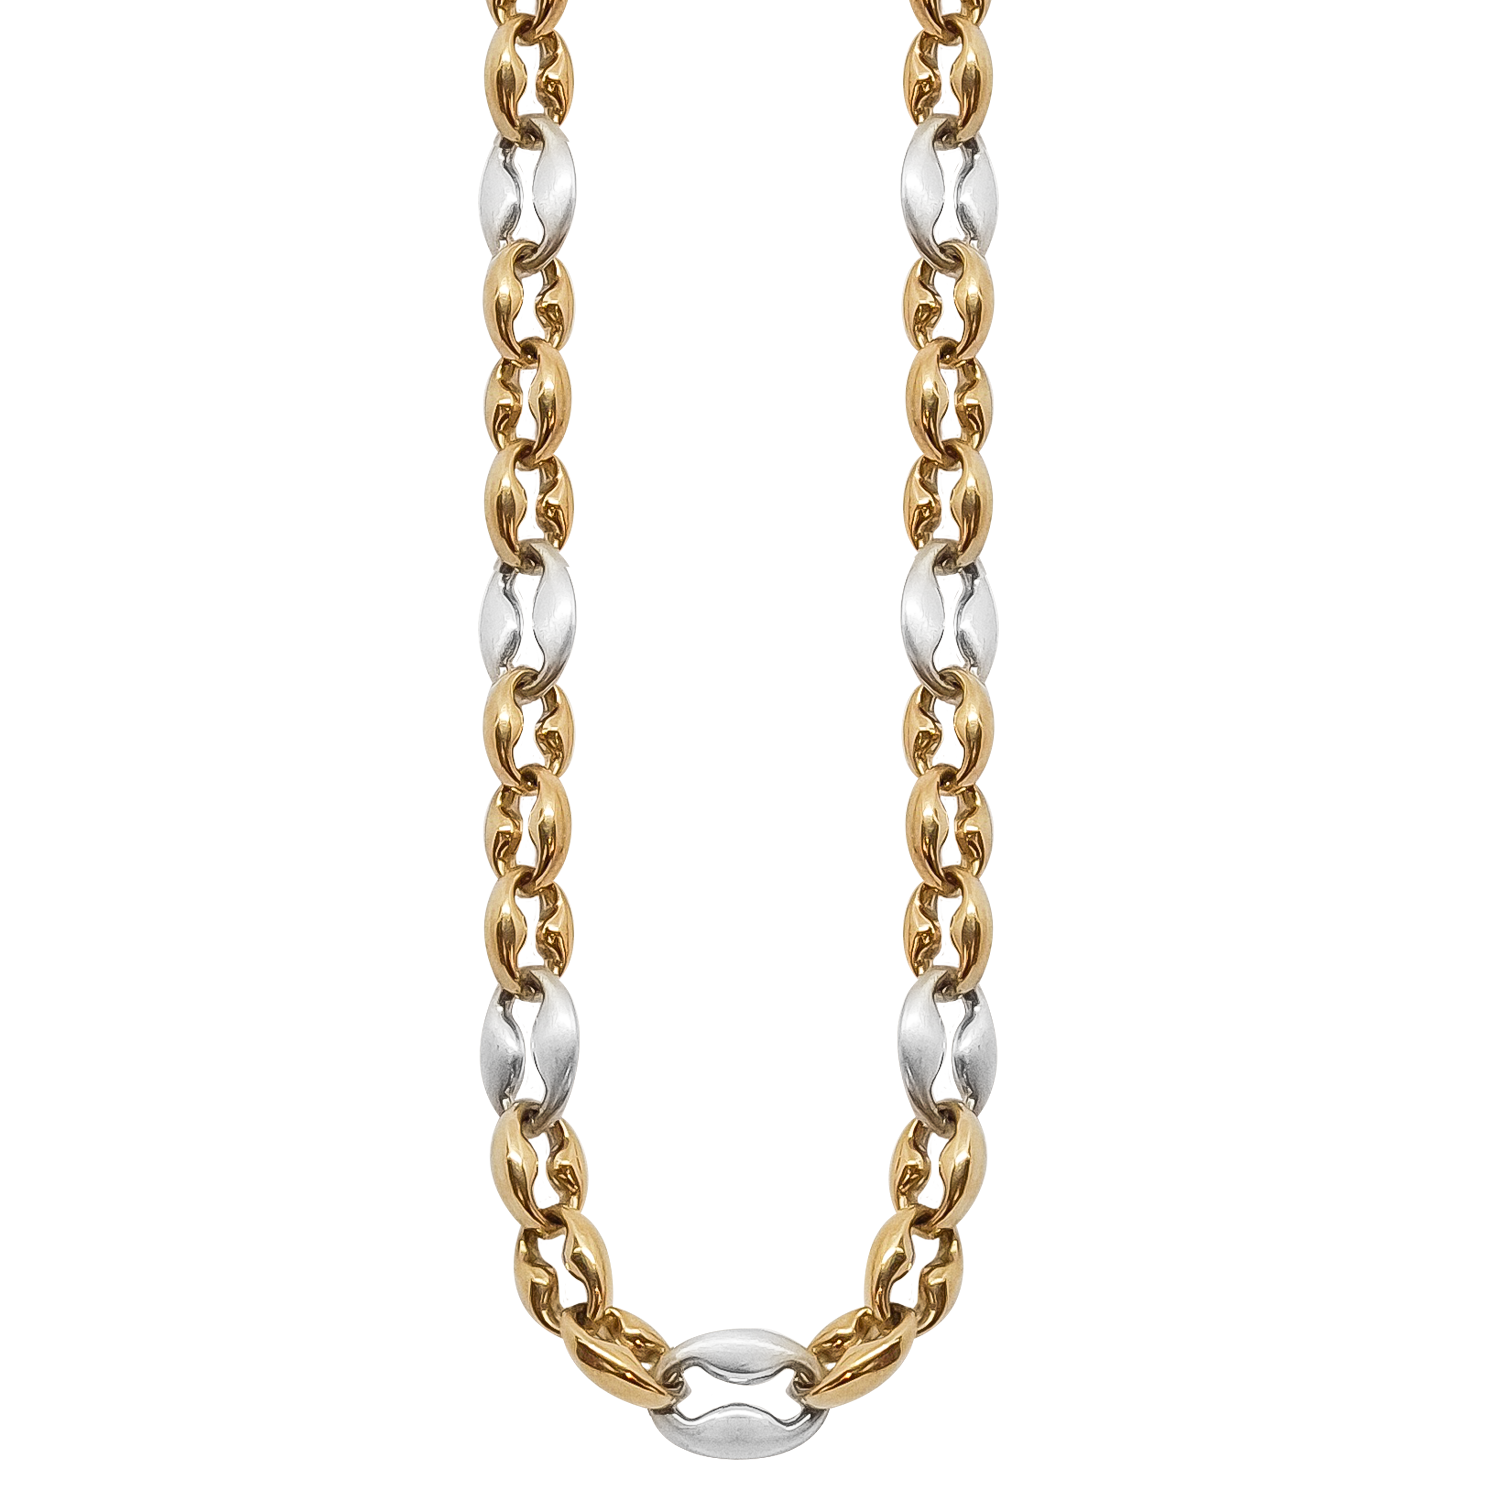 Two-tone mat and gloss Gucci Link Bracelet in 9ct Two-Tone Gold in hollow tubes for a lighter weight on your shoulders.